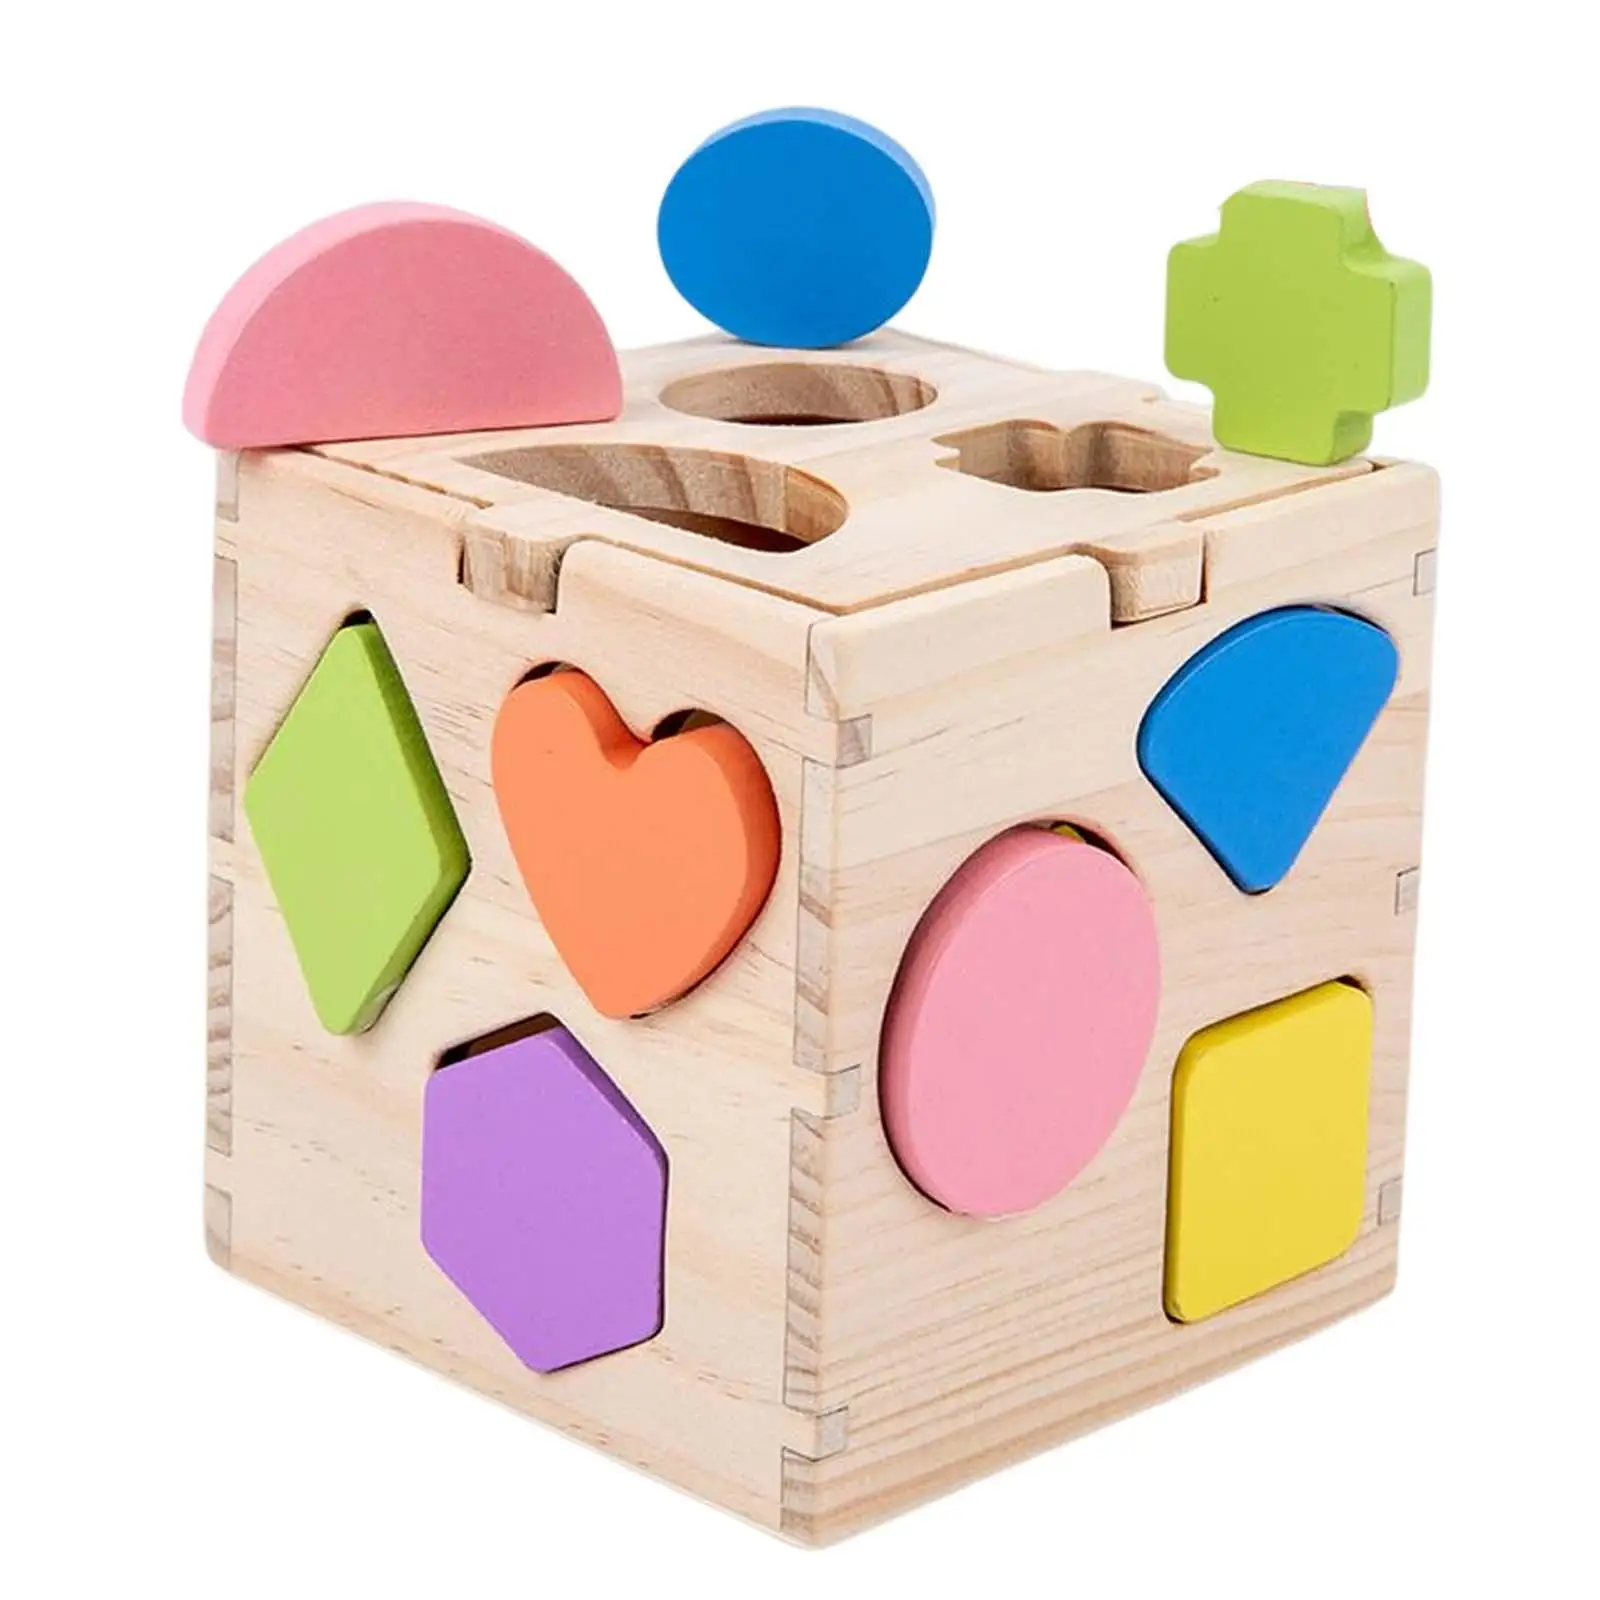 Wooden Building Blocks Early Educational Toys Intelligence Toy for Children Girls Birthday Gifts